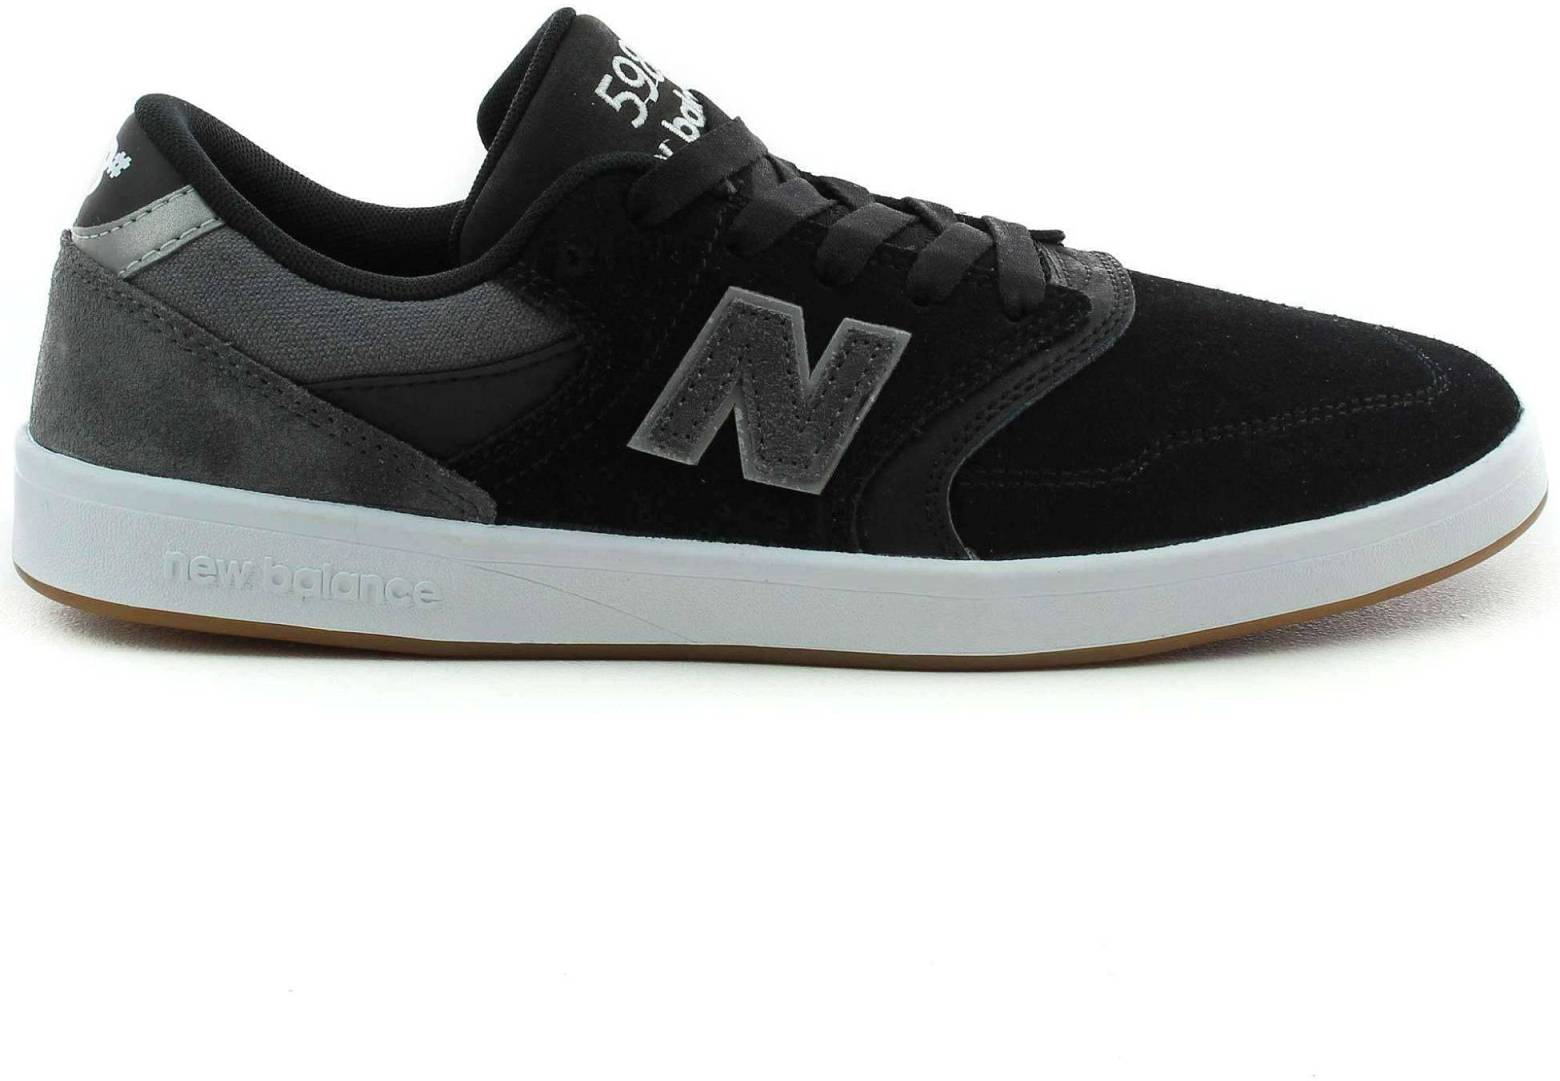 New Balance 598 – Shoes Reviews & Reasons To Buy